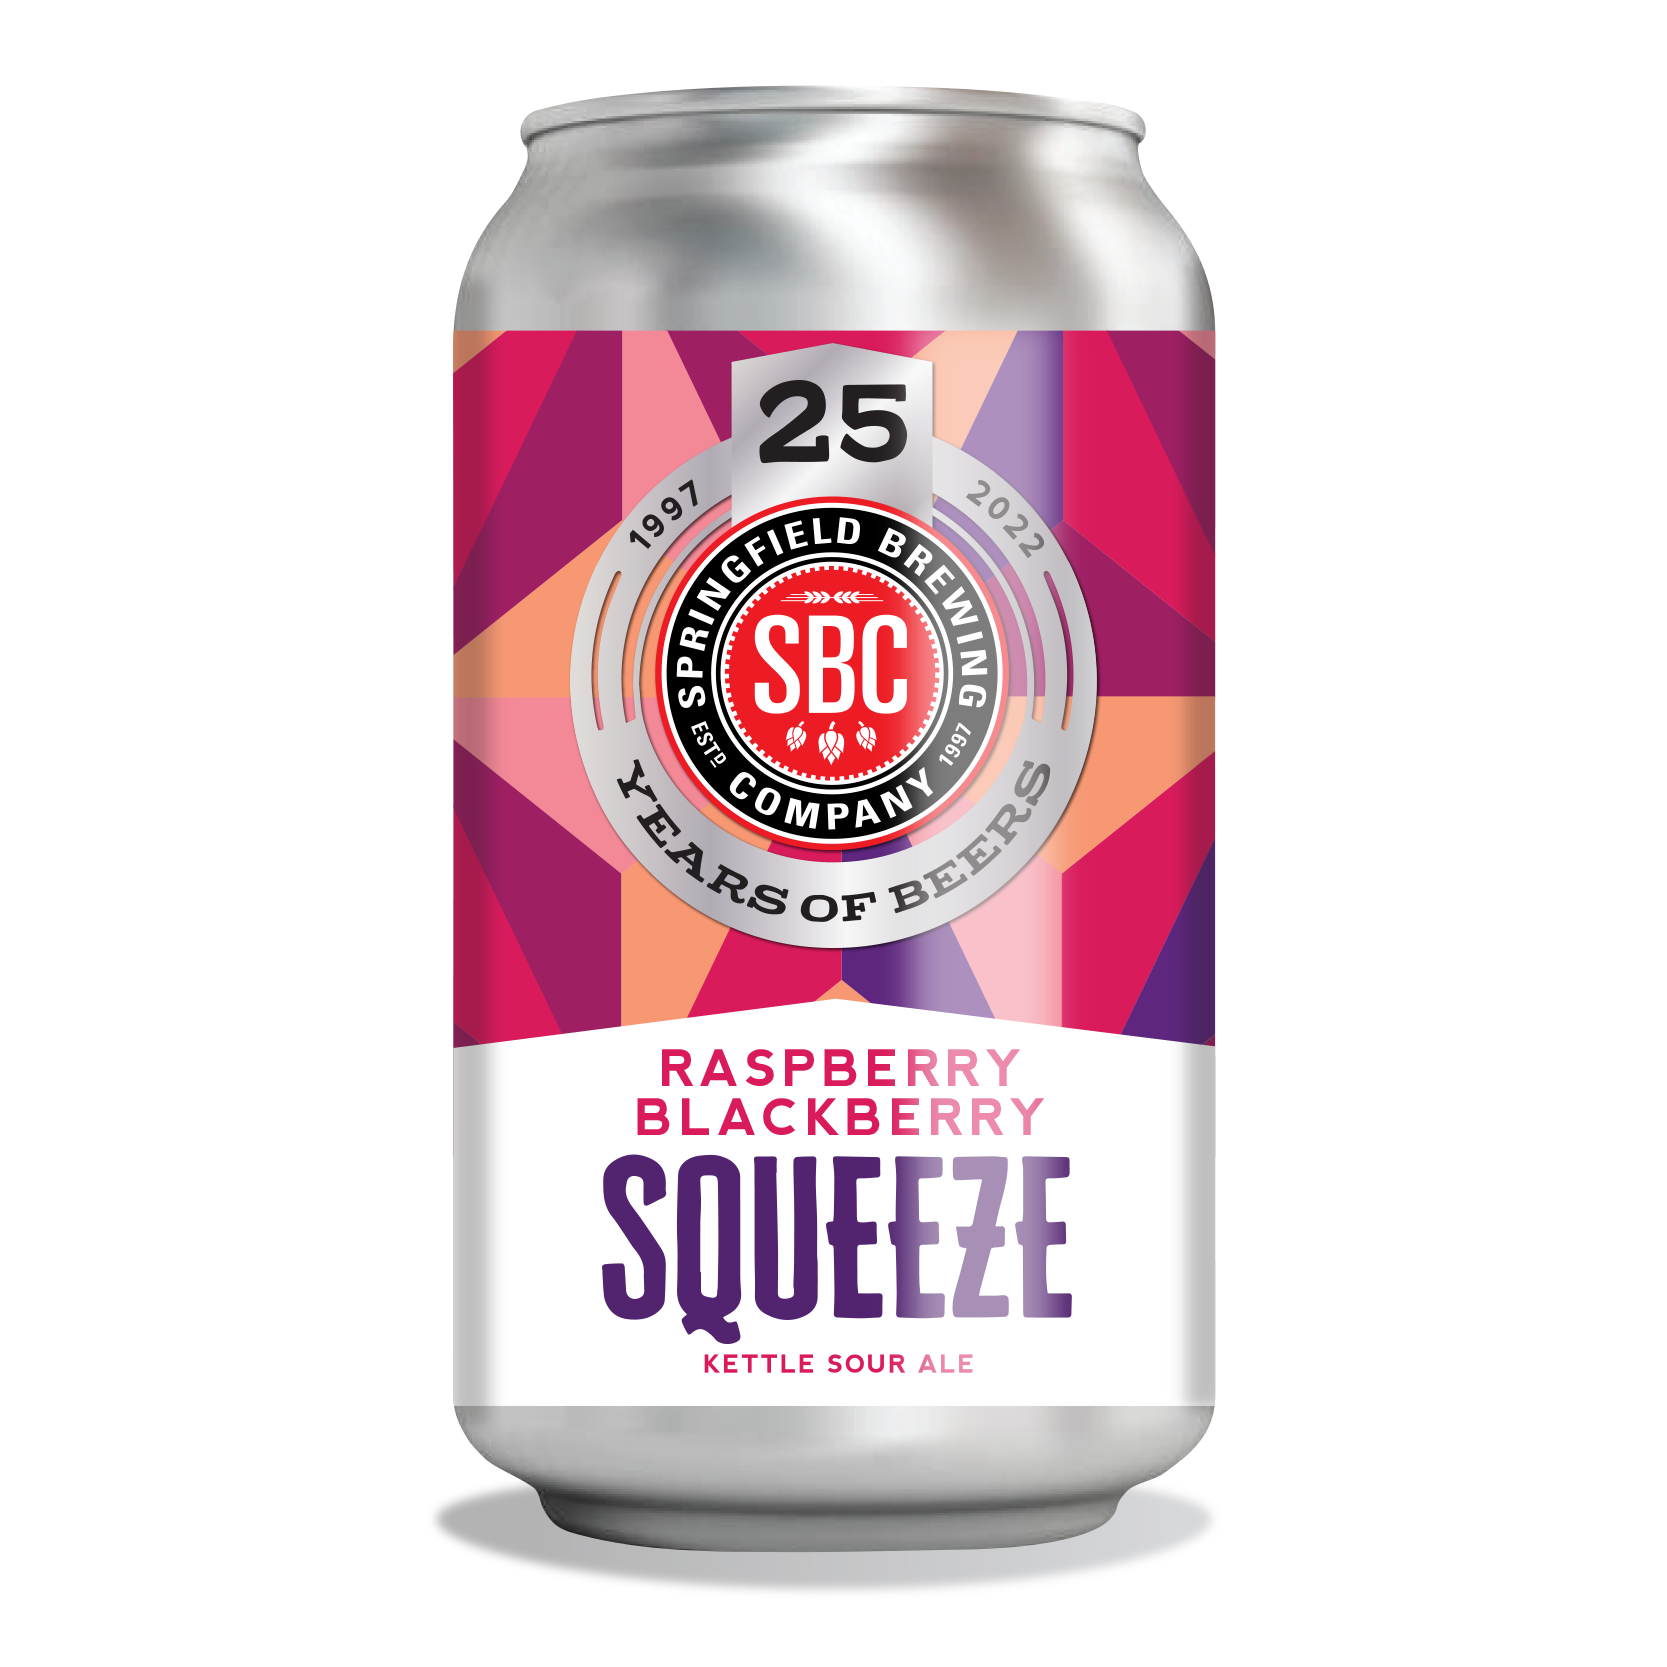 https://brewery.springfieldbrewingco.com/wp-content/uploads/2022/08/25thBerrySqueezeUpdate_CanWebsite.png